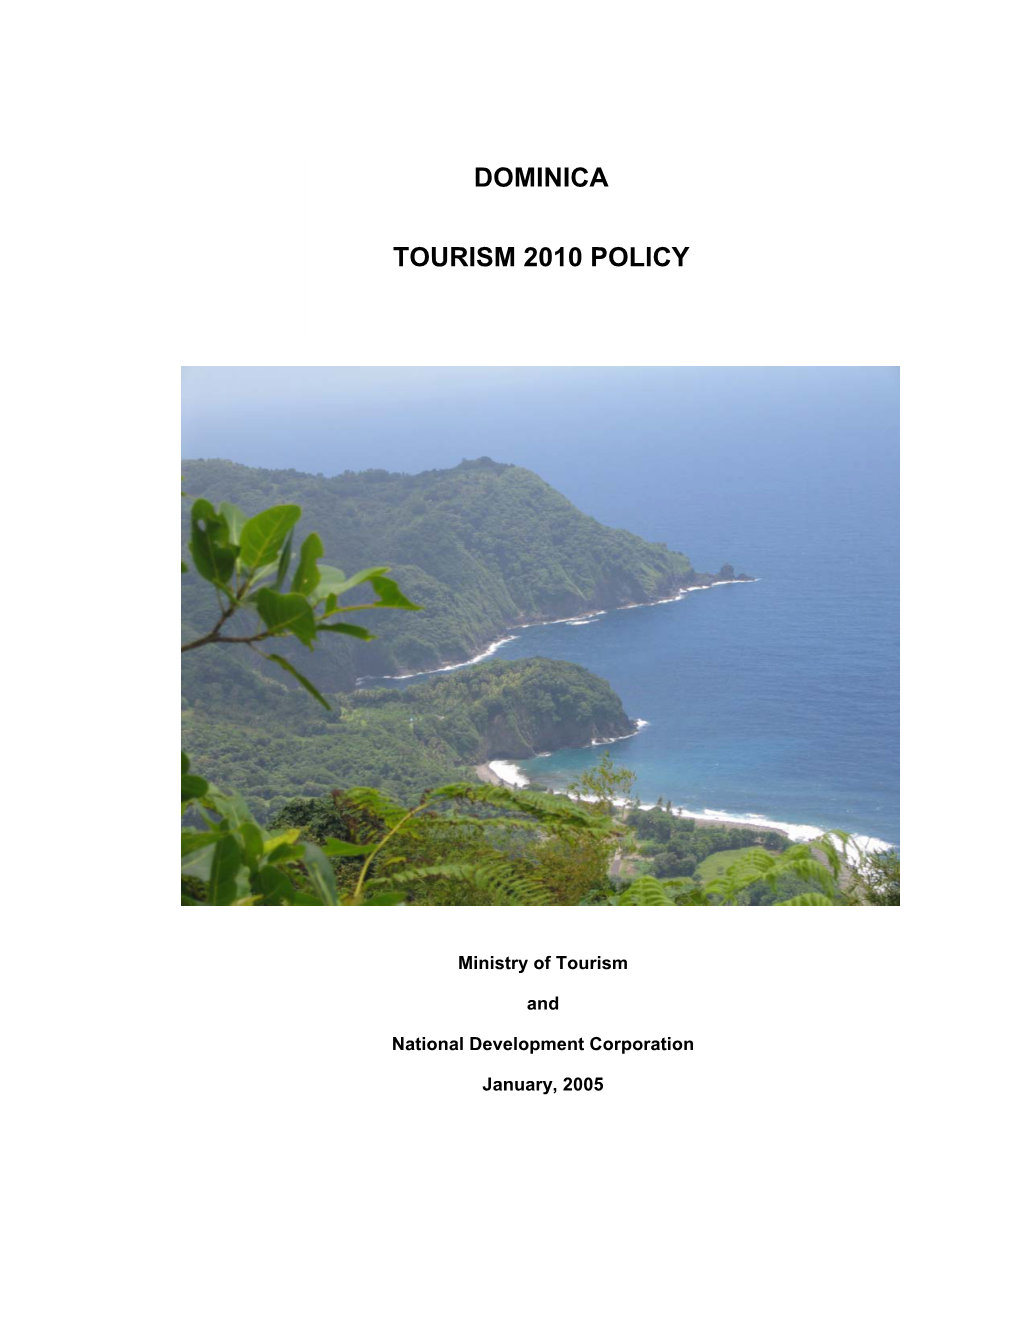 DOMINICA TOURISM 2010 POLICY- VISION and OBJECTIVES ______14 4.1 the Vision for Tourism 14 4.2 Guiding Principles 14 4.3 Tourism Sector Objectives 14